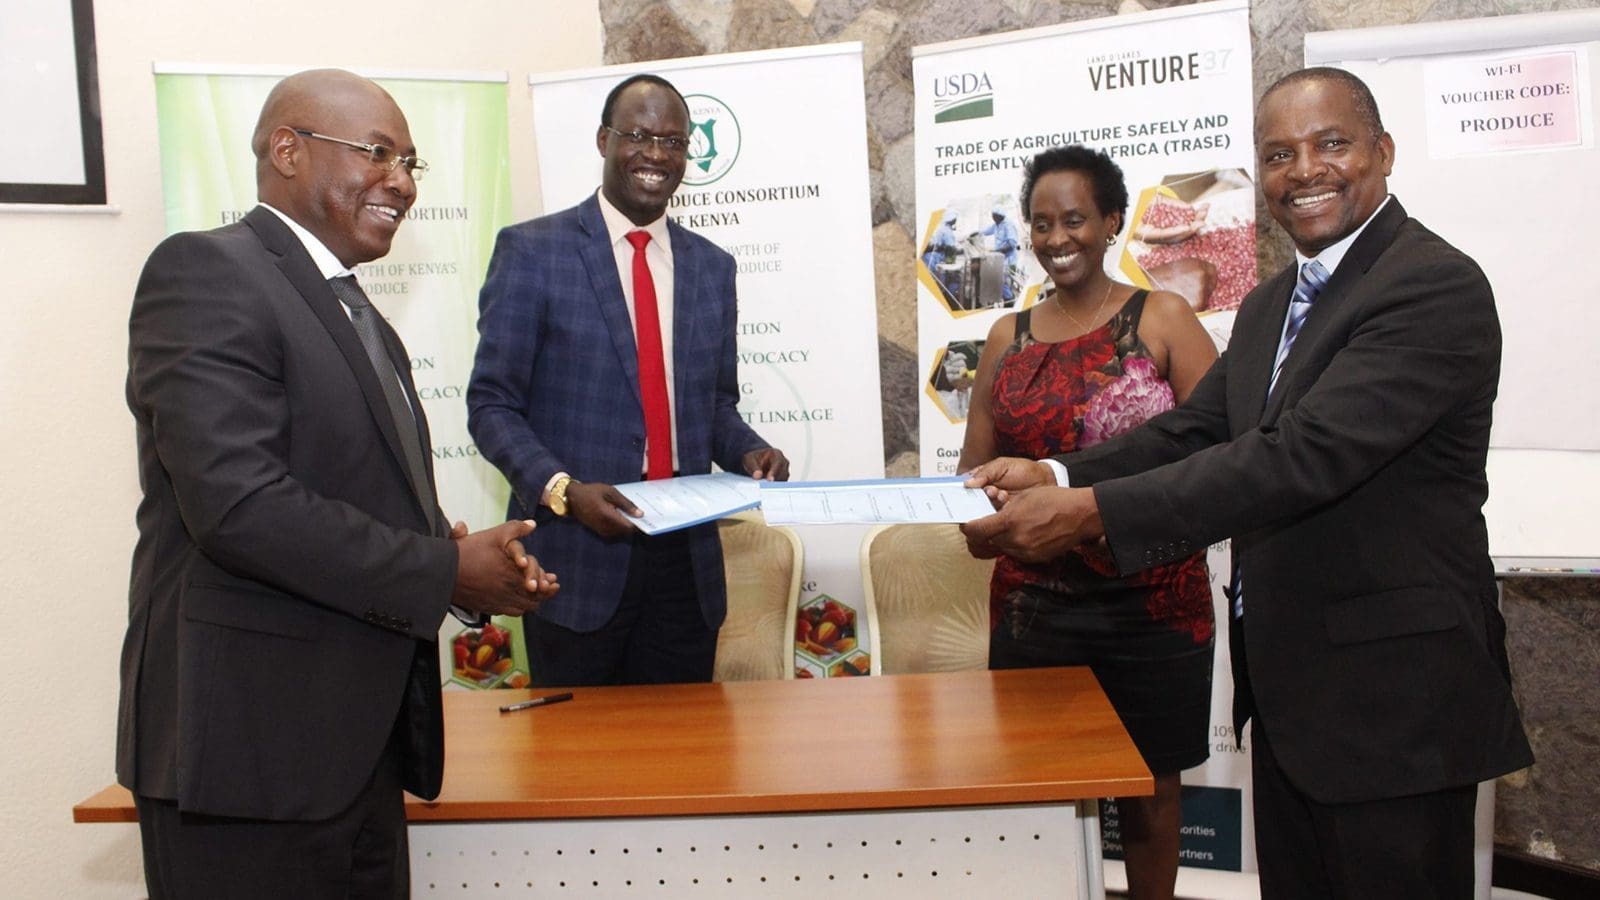 Kenya’s horticultural sector receives support from Land O’Lakes Venture37 to boost produce acceptability